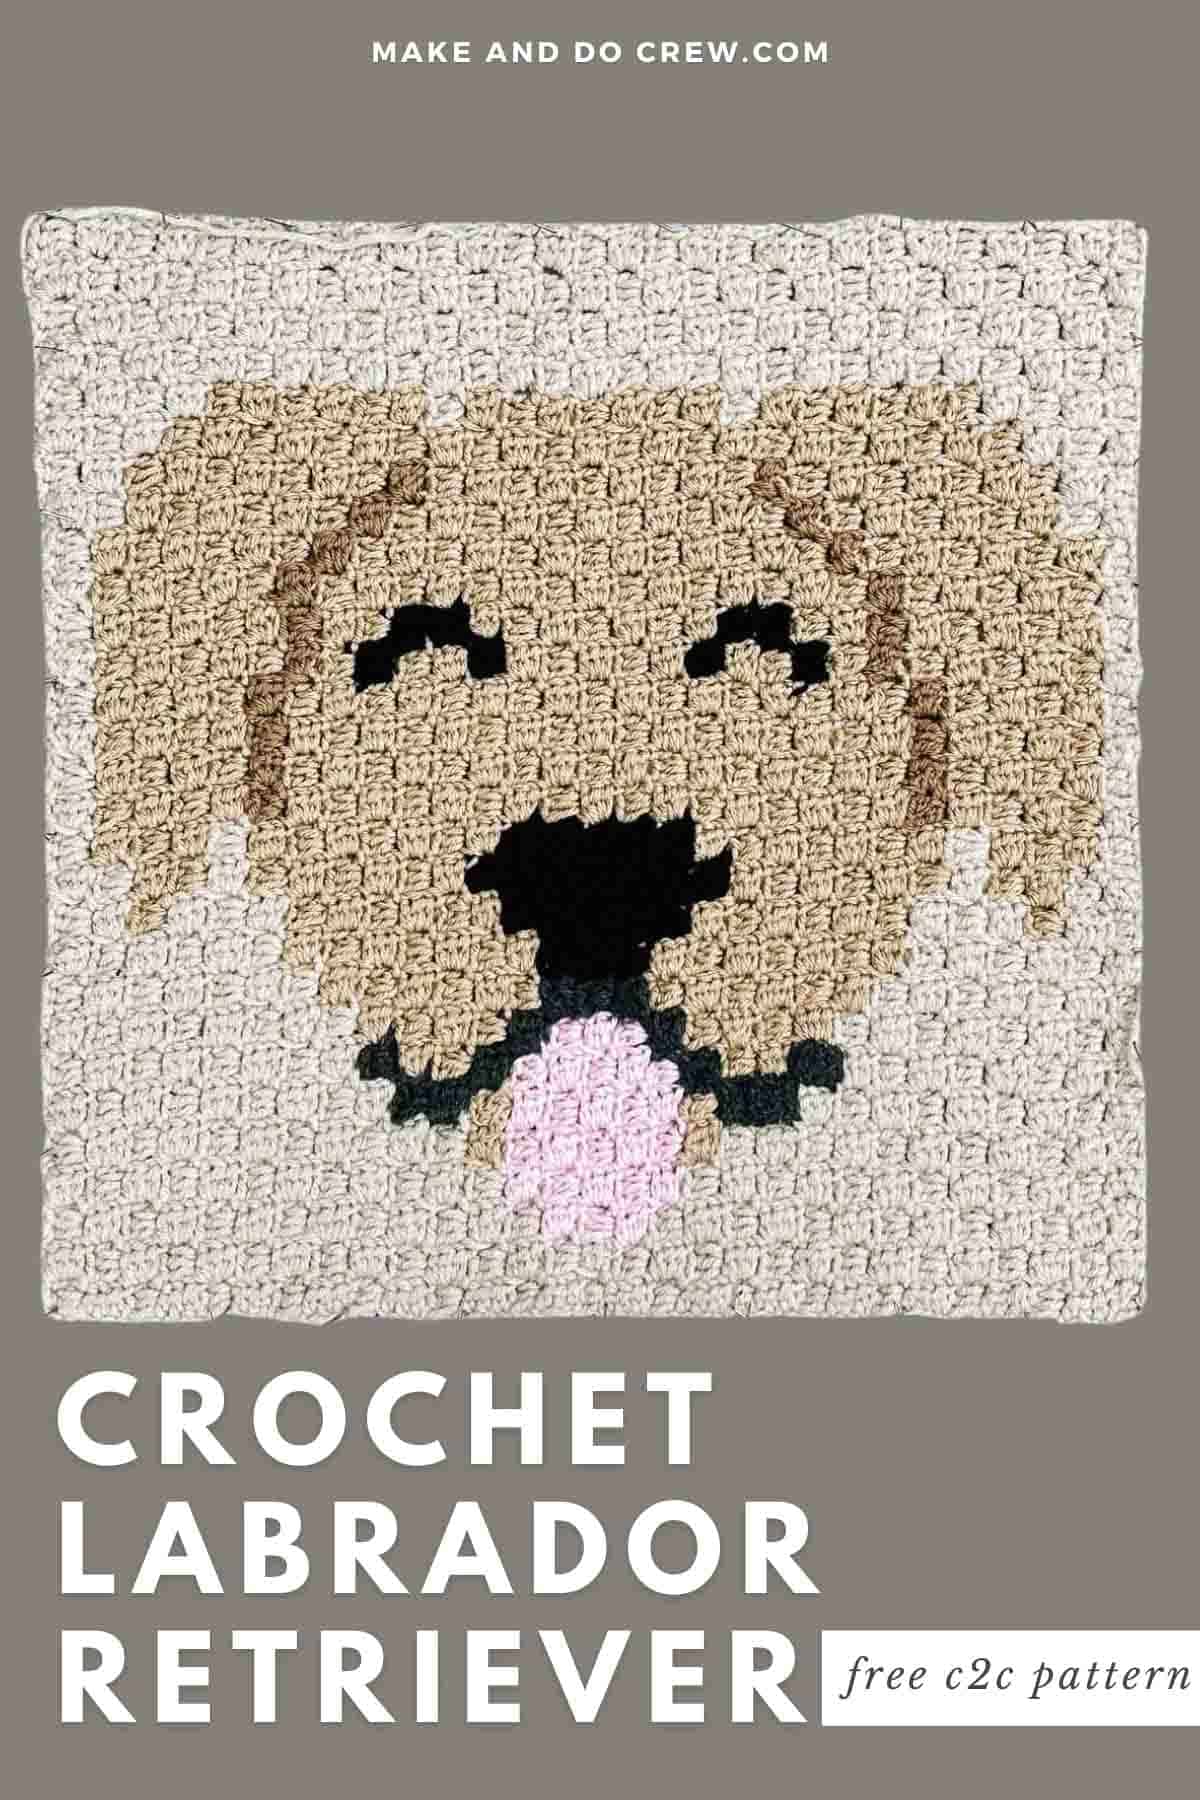 This image shows a free crochet pattern for a labrador retriever dog face blanket.